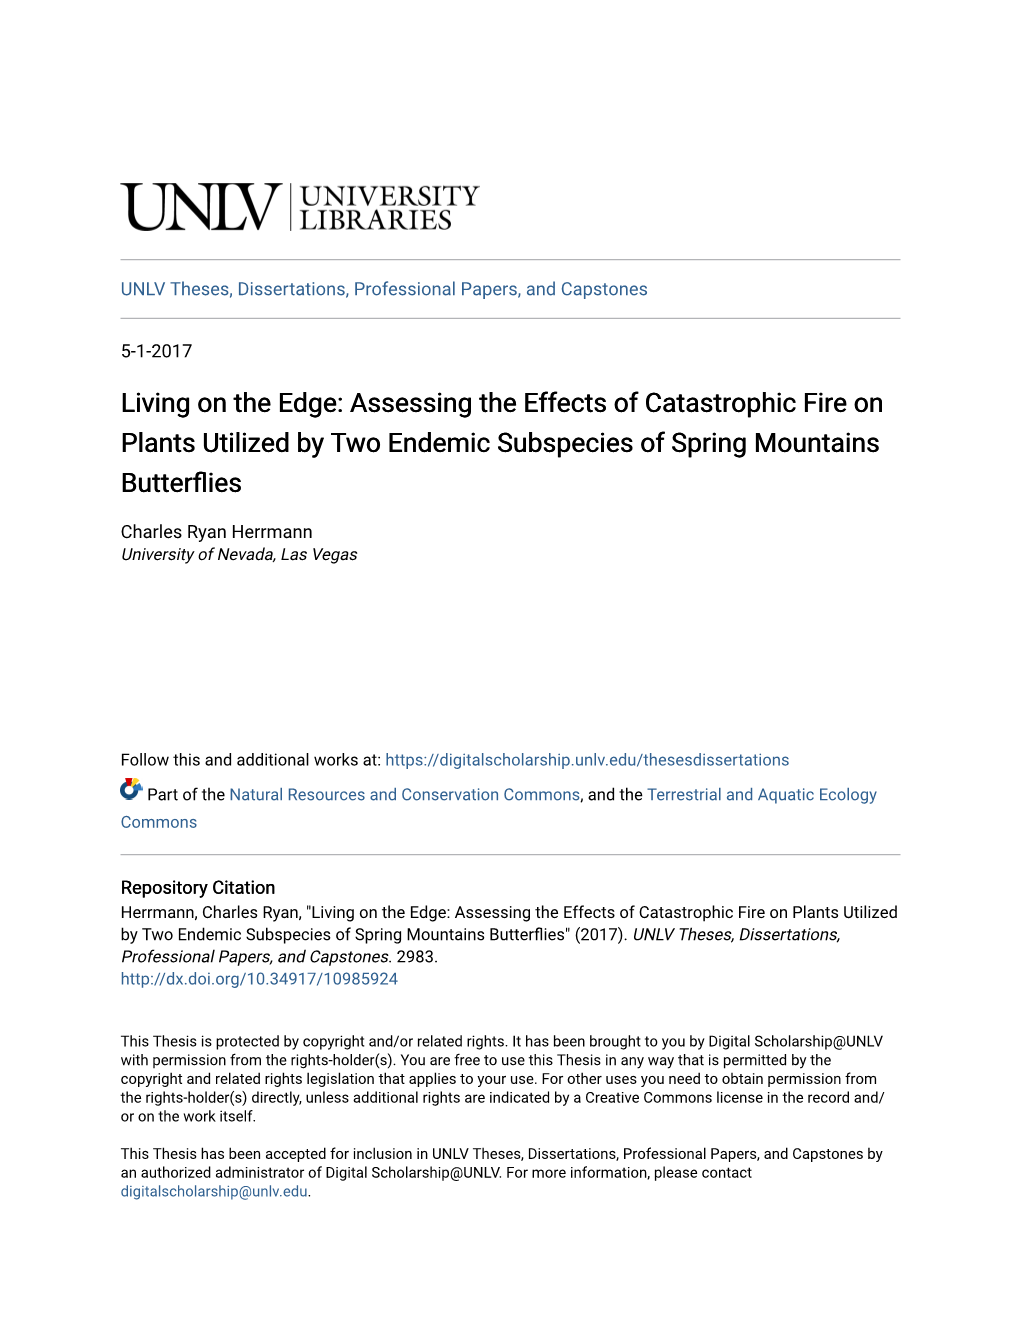 Assessing the Effects of Catastrophic Fire on Plants Utilized by Two Endemic Subspecies of Spring Mountains Butterflies